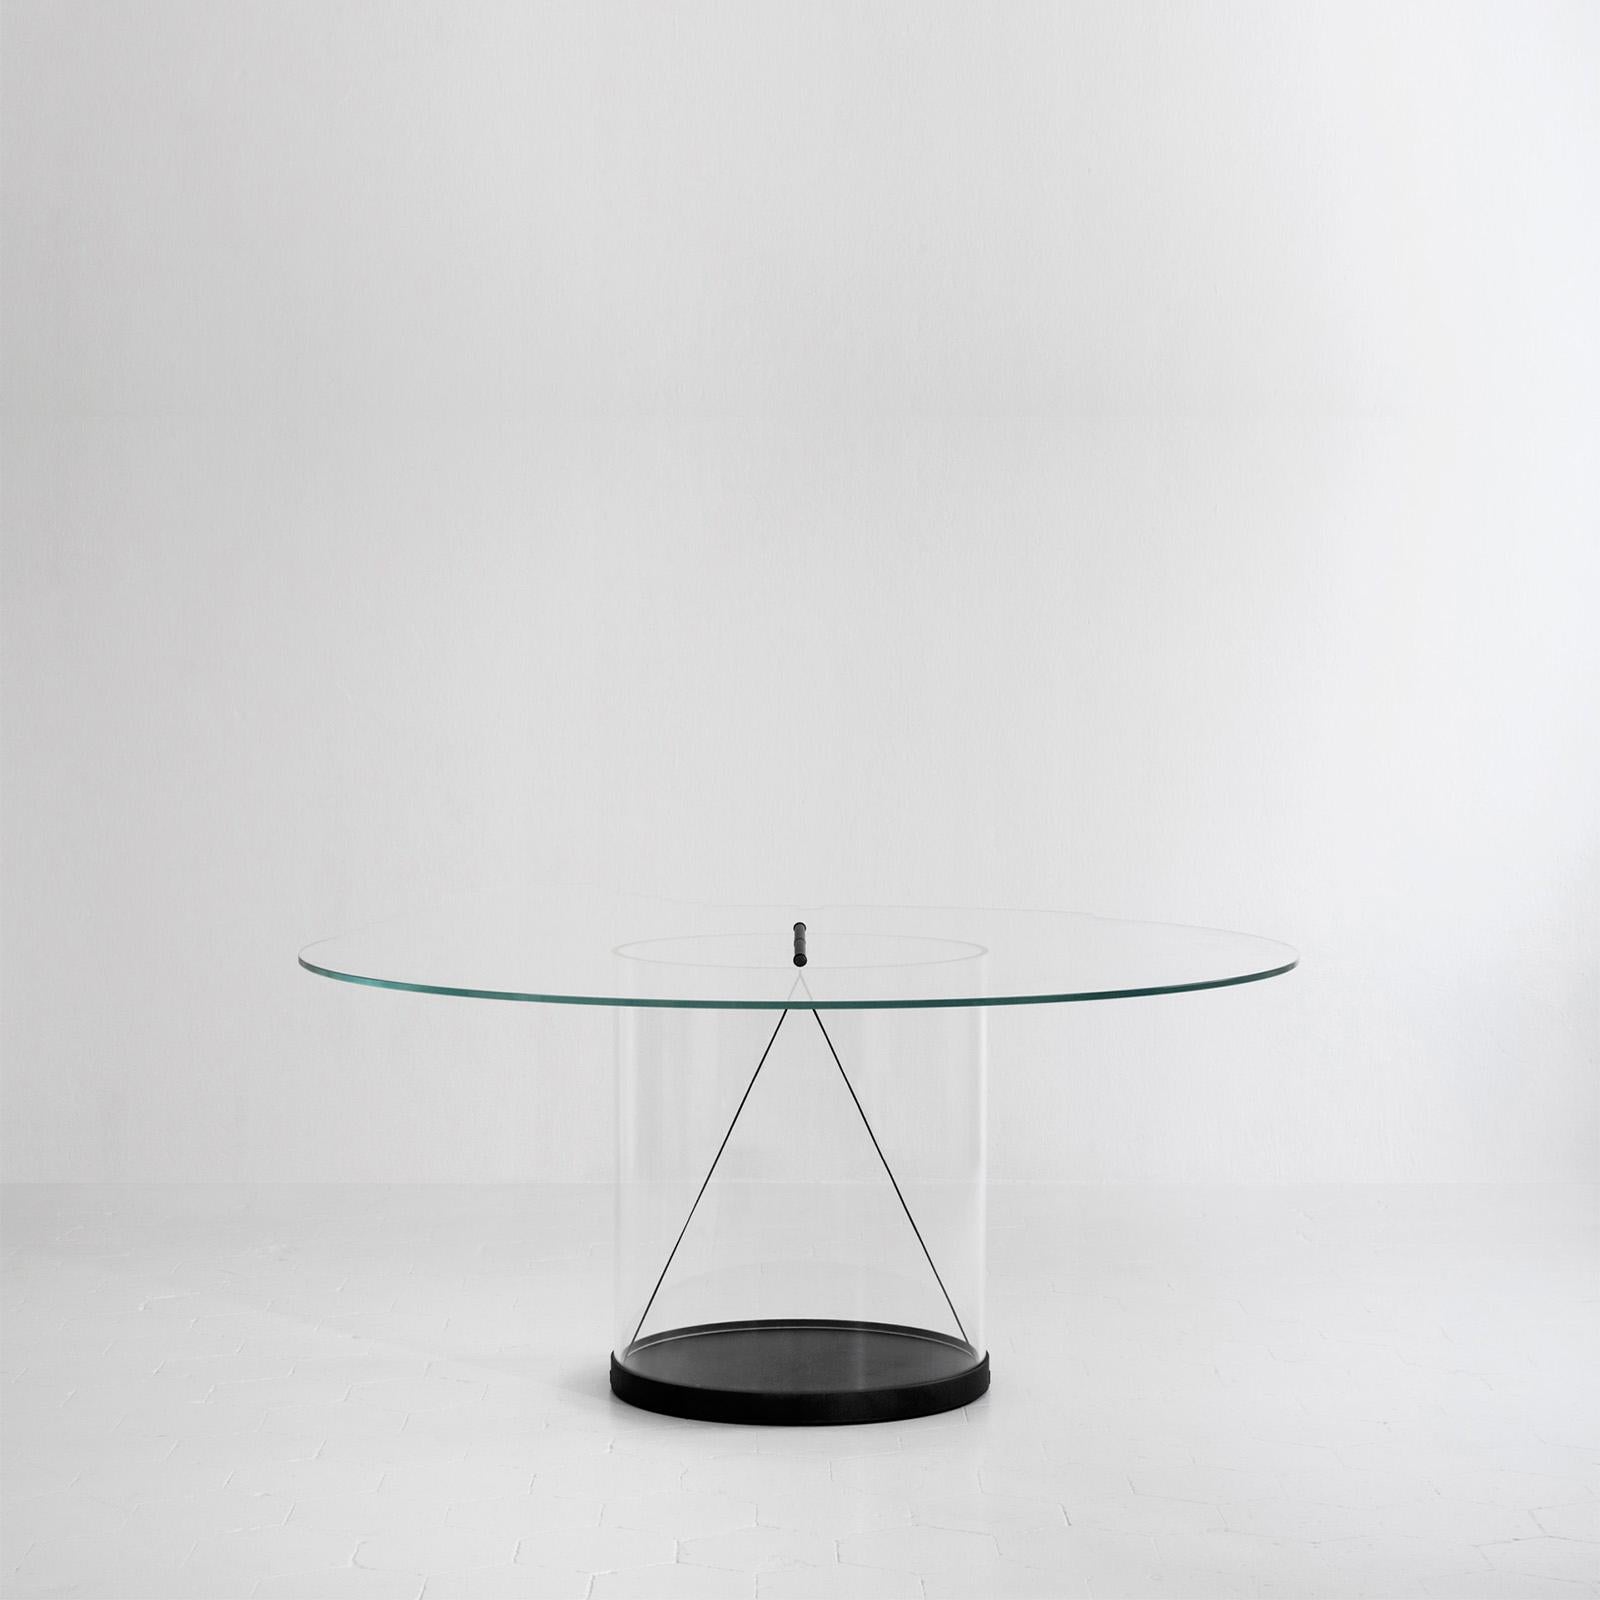 The core of the round table is represented by the transparency of its main elements: the acrylic cylinder and the glass top. This configuration aims to make the structure disappear, allowing the central geometry of the connection to stand out,